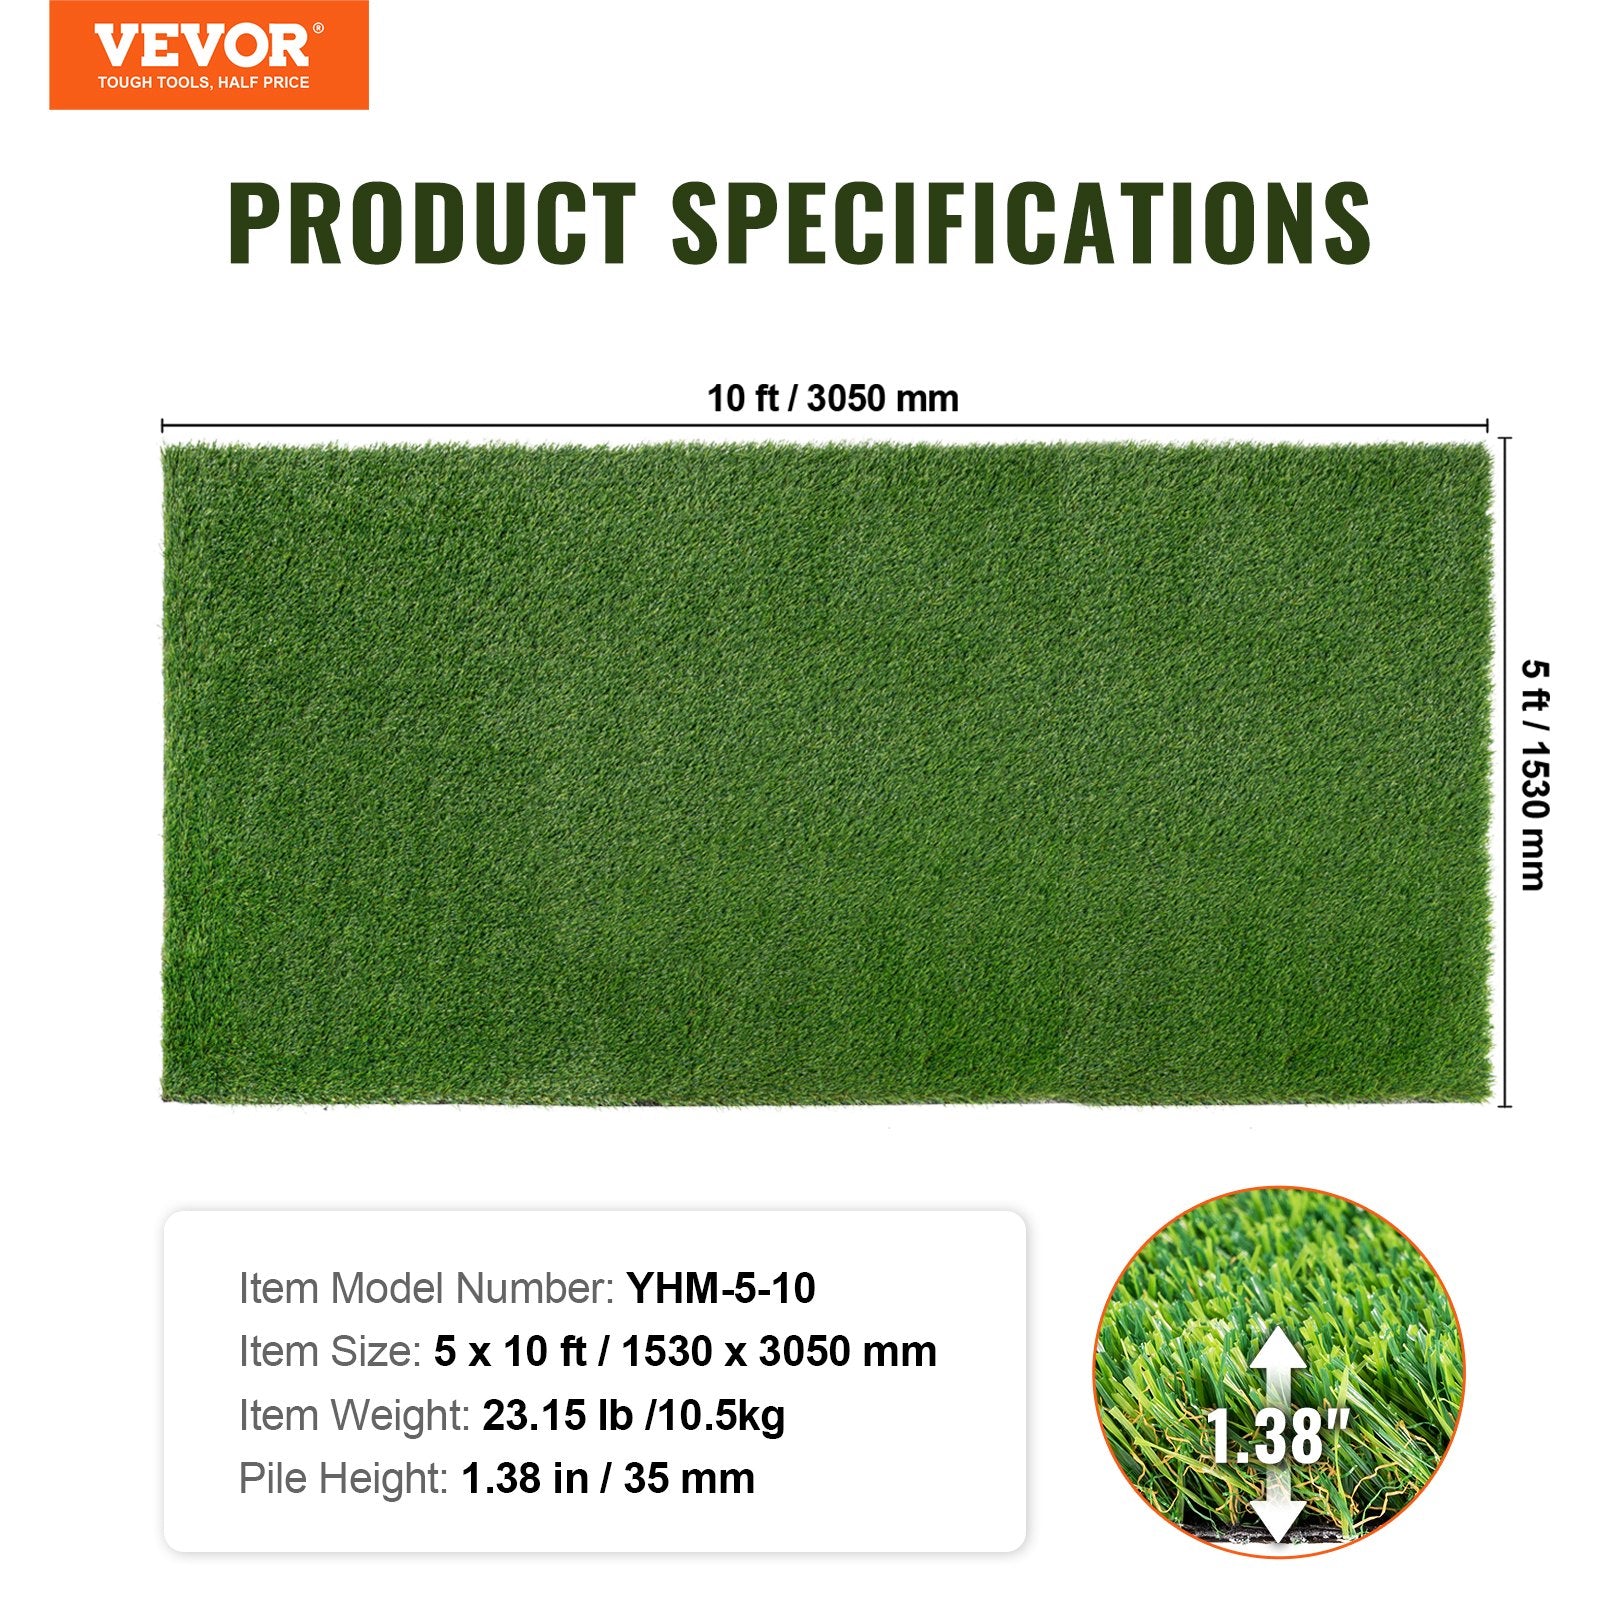 VEVOR Artifical Grass, 5 x 10 ft Rug Green Turf, 1.38"Fake Door Mat Outdoor Patio Lawn Decoration, Easy to Clean with Drainage Holes, Perfect For Multi-Purpose Home Indoor Entryway Scraper Dog Mats-5